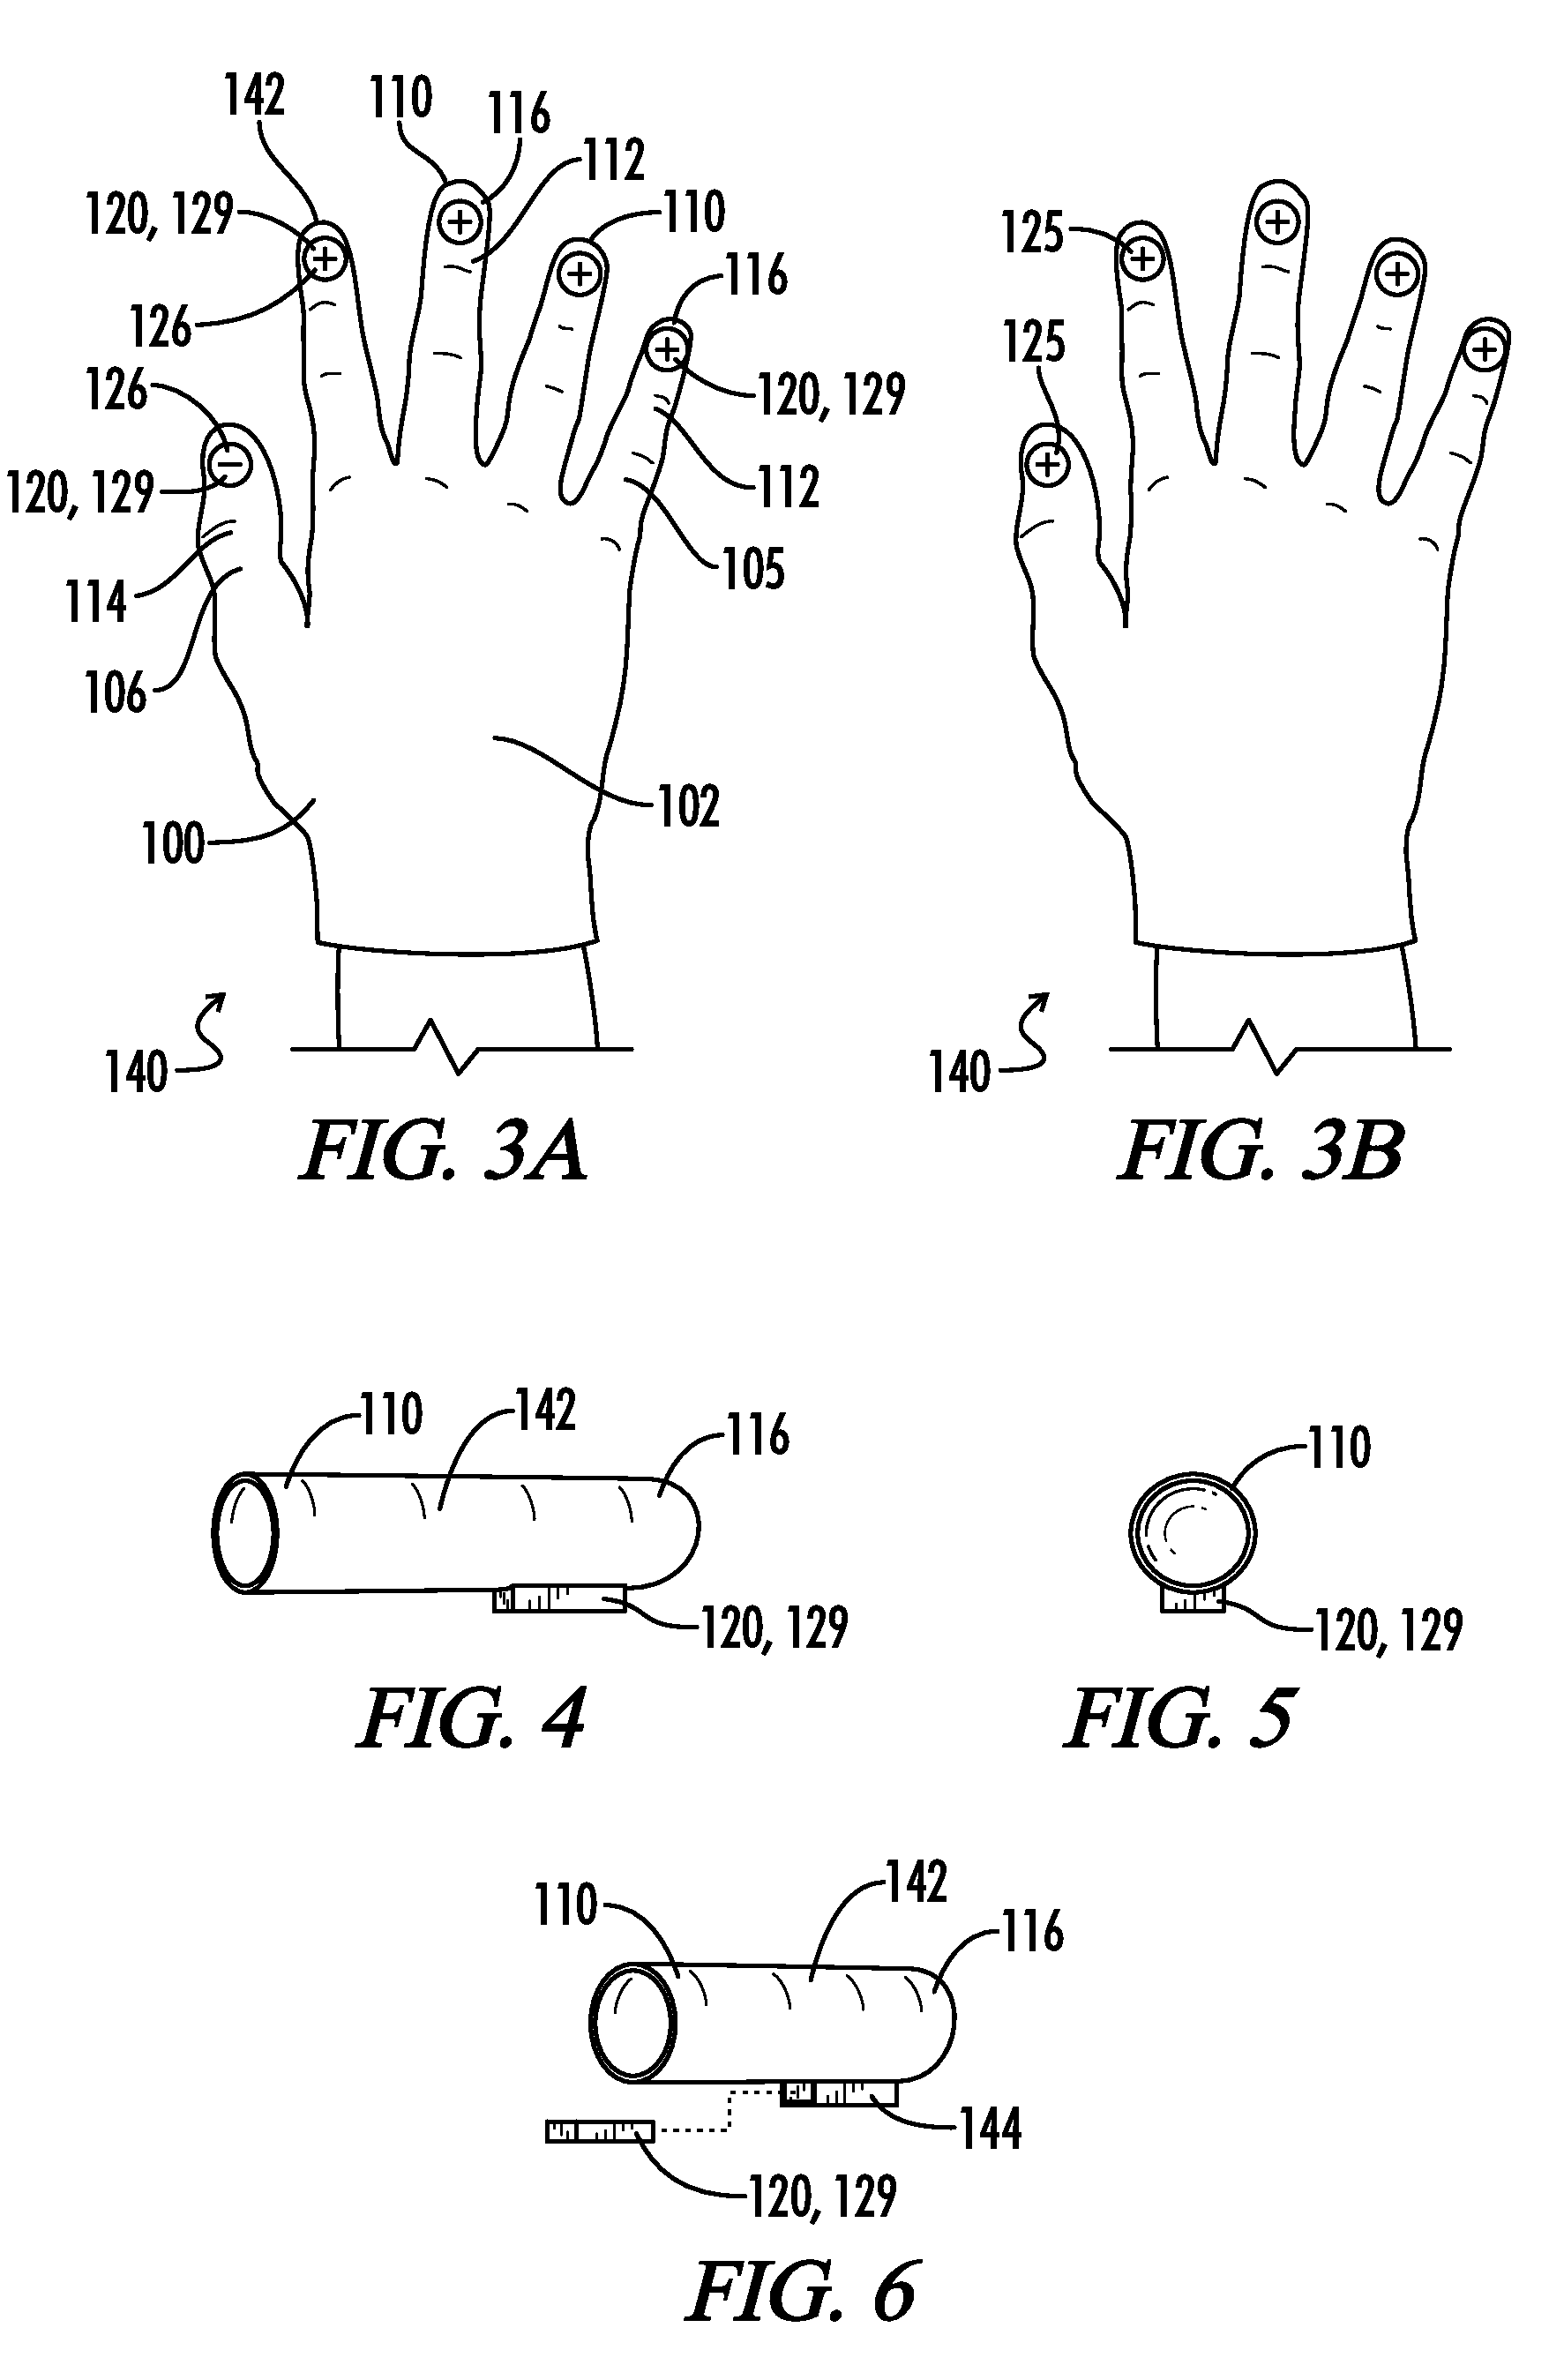 Anthropometric characterisation of palm and finger shapes to